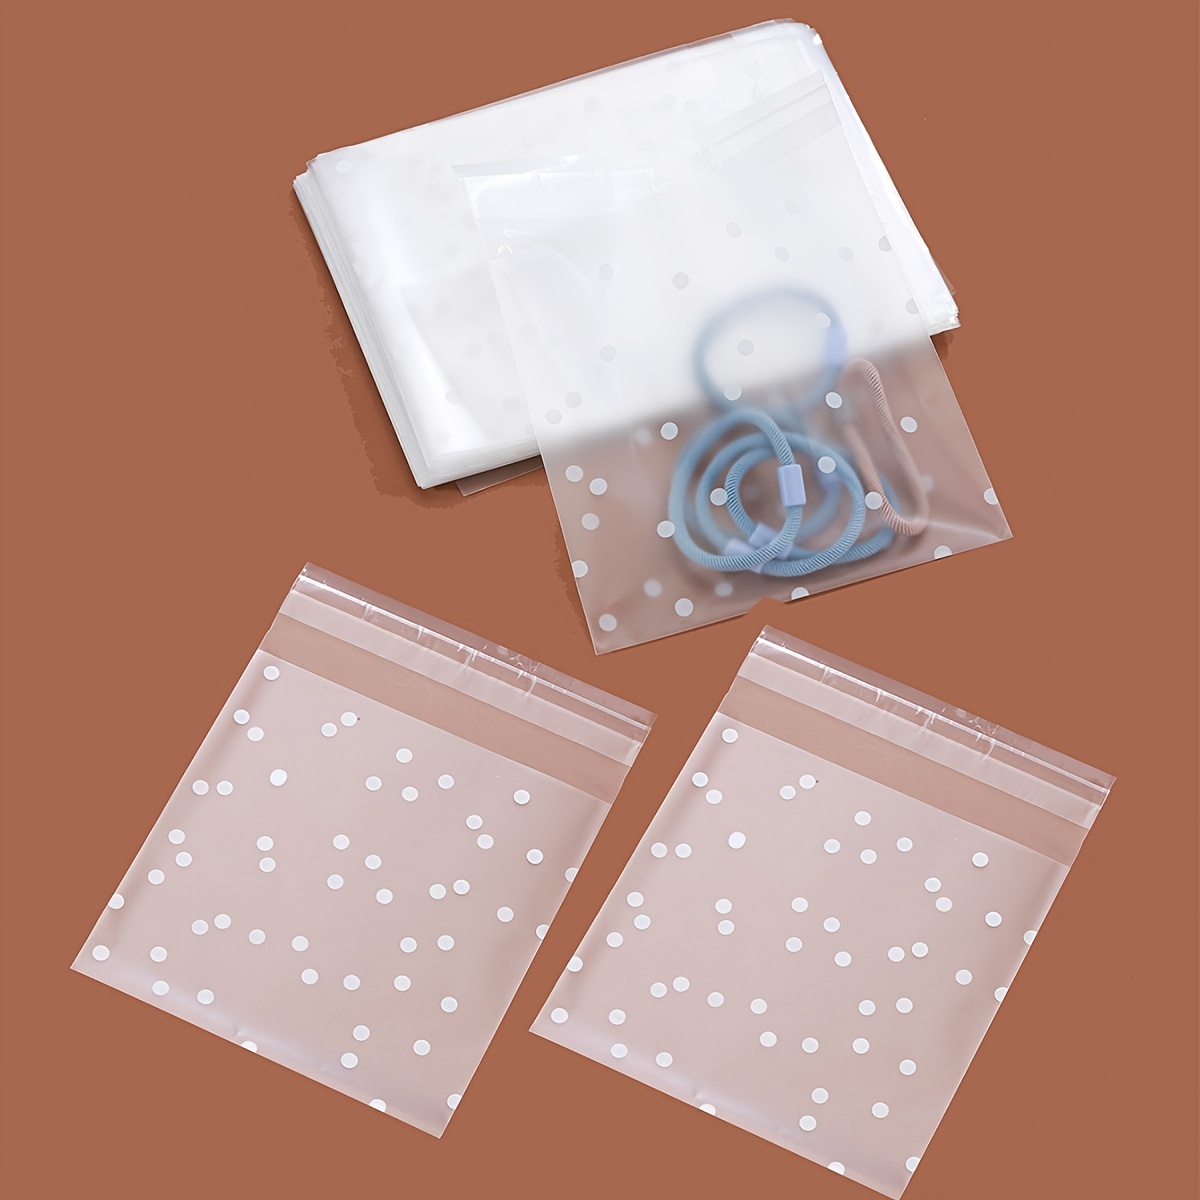 

100pcs White Dot Transparent Packaging Bags Self Sealing Small Ziplock Reclosable Candy Cookie Storage Diy Jewelry Gift Bags Personal Use & Small Business Supplies